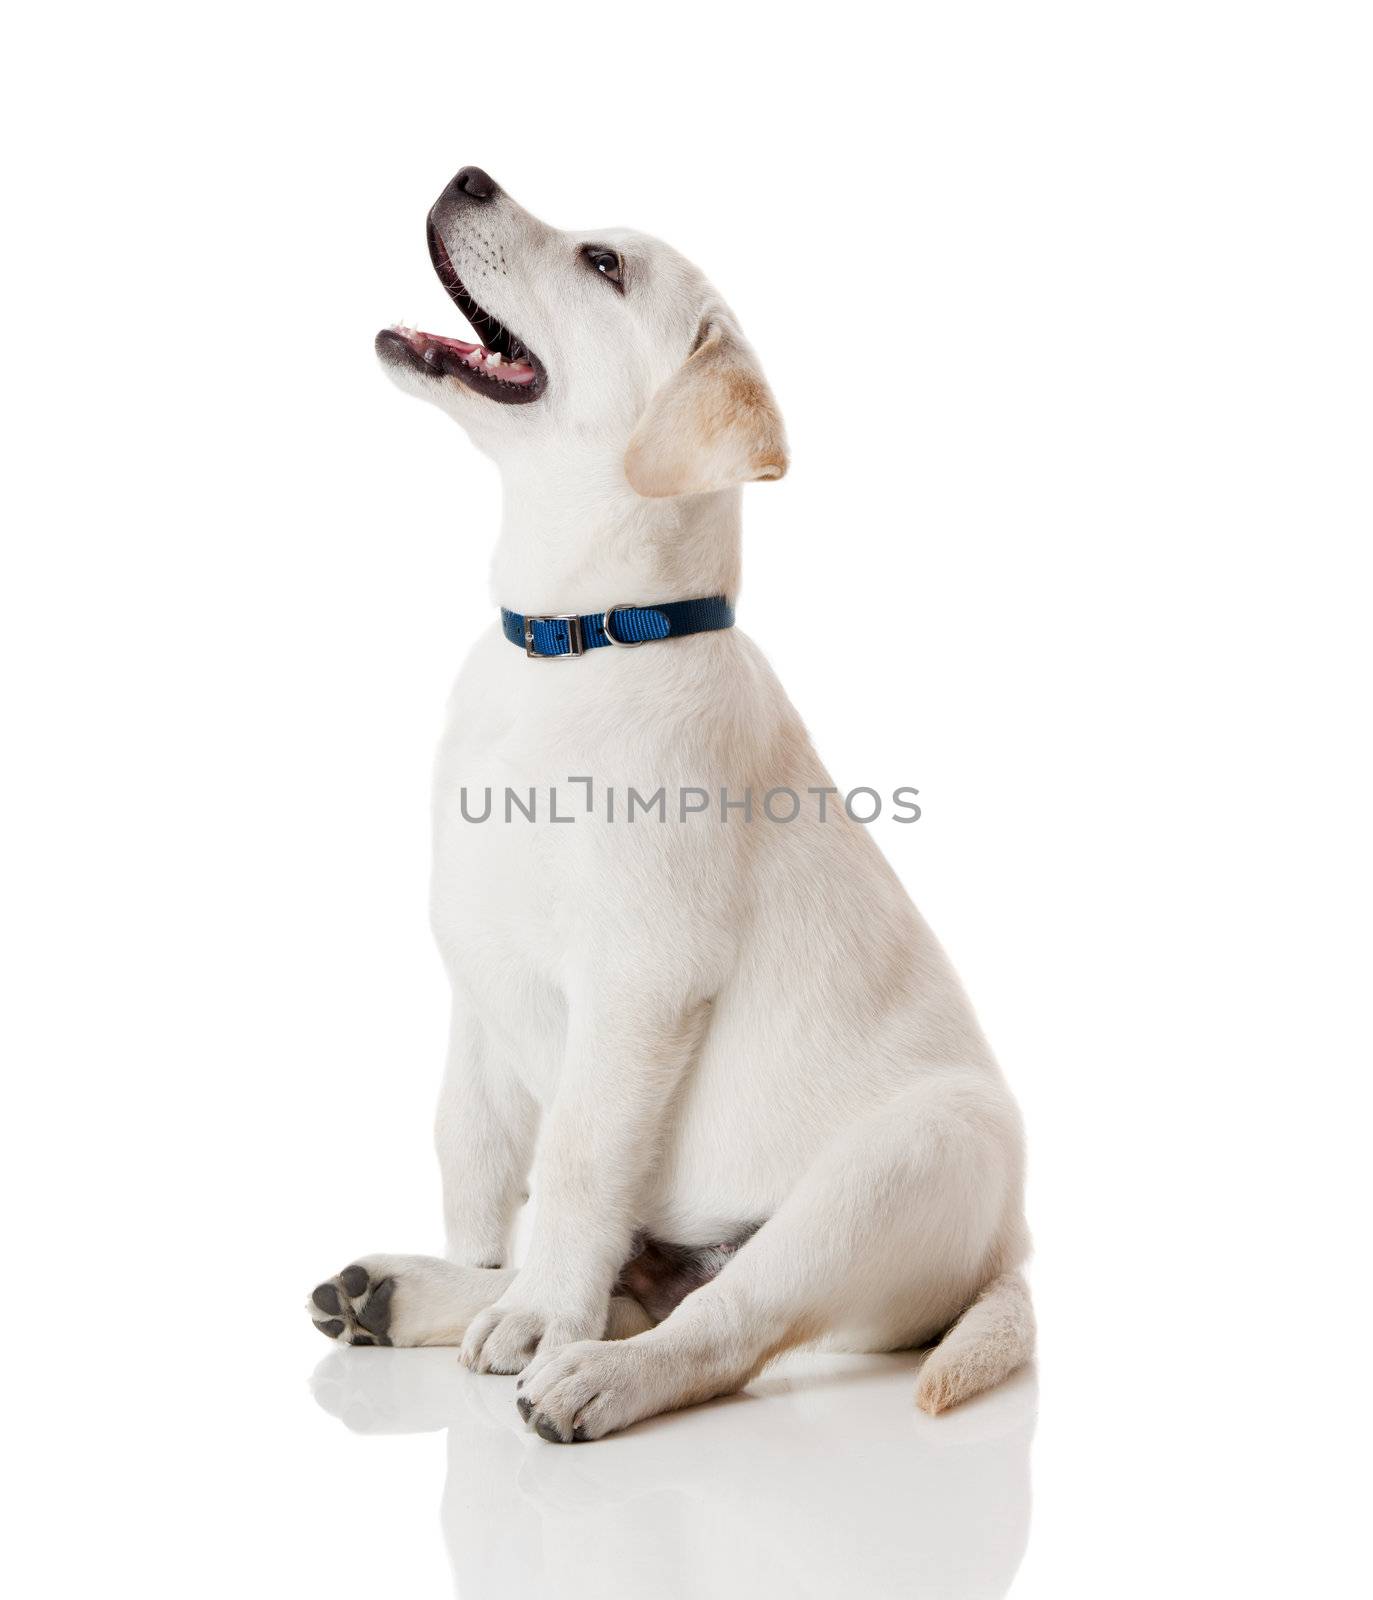 Beautiful labrador retriever cream puppy isolated on white background wearing a blue dog-collar